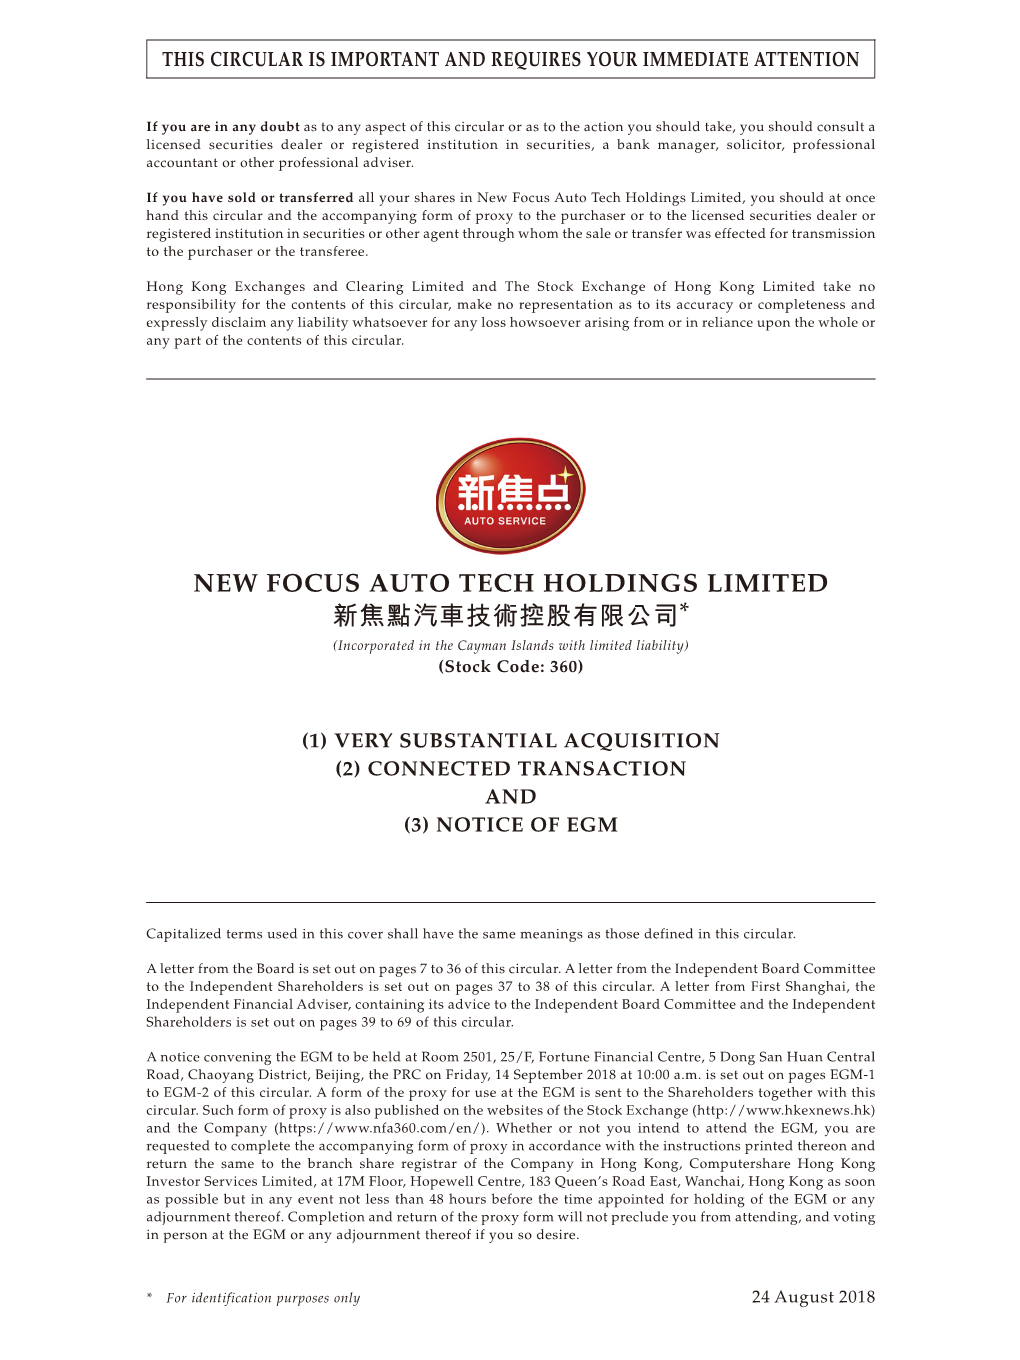 NEW FOCUS AUTO TECH HOLDINGS LIMITED 新焦點汽車技術控股有限公司* (Incorporated in the Cayman Islands with Limited Liability) (Stock Code: 360)